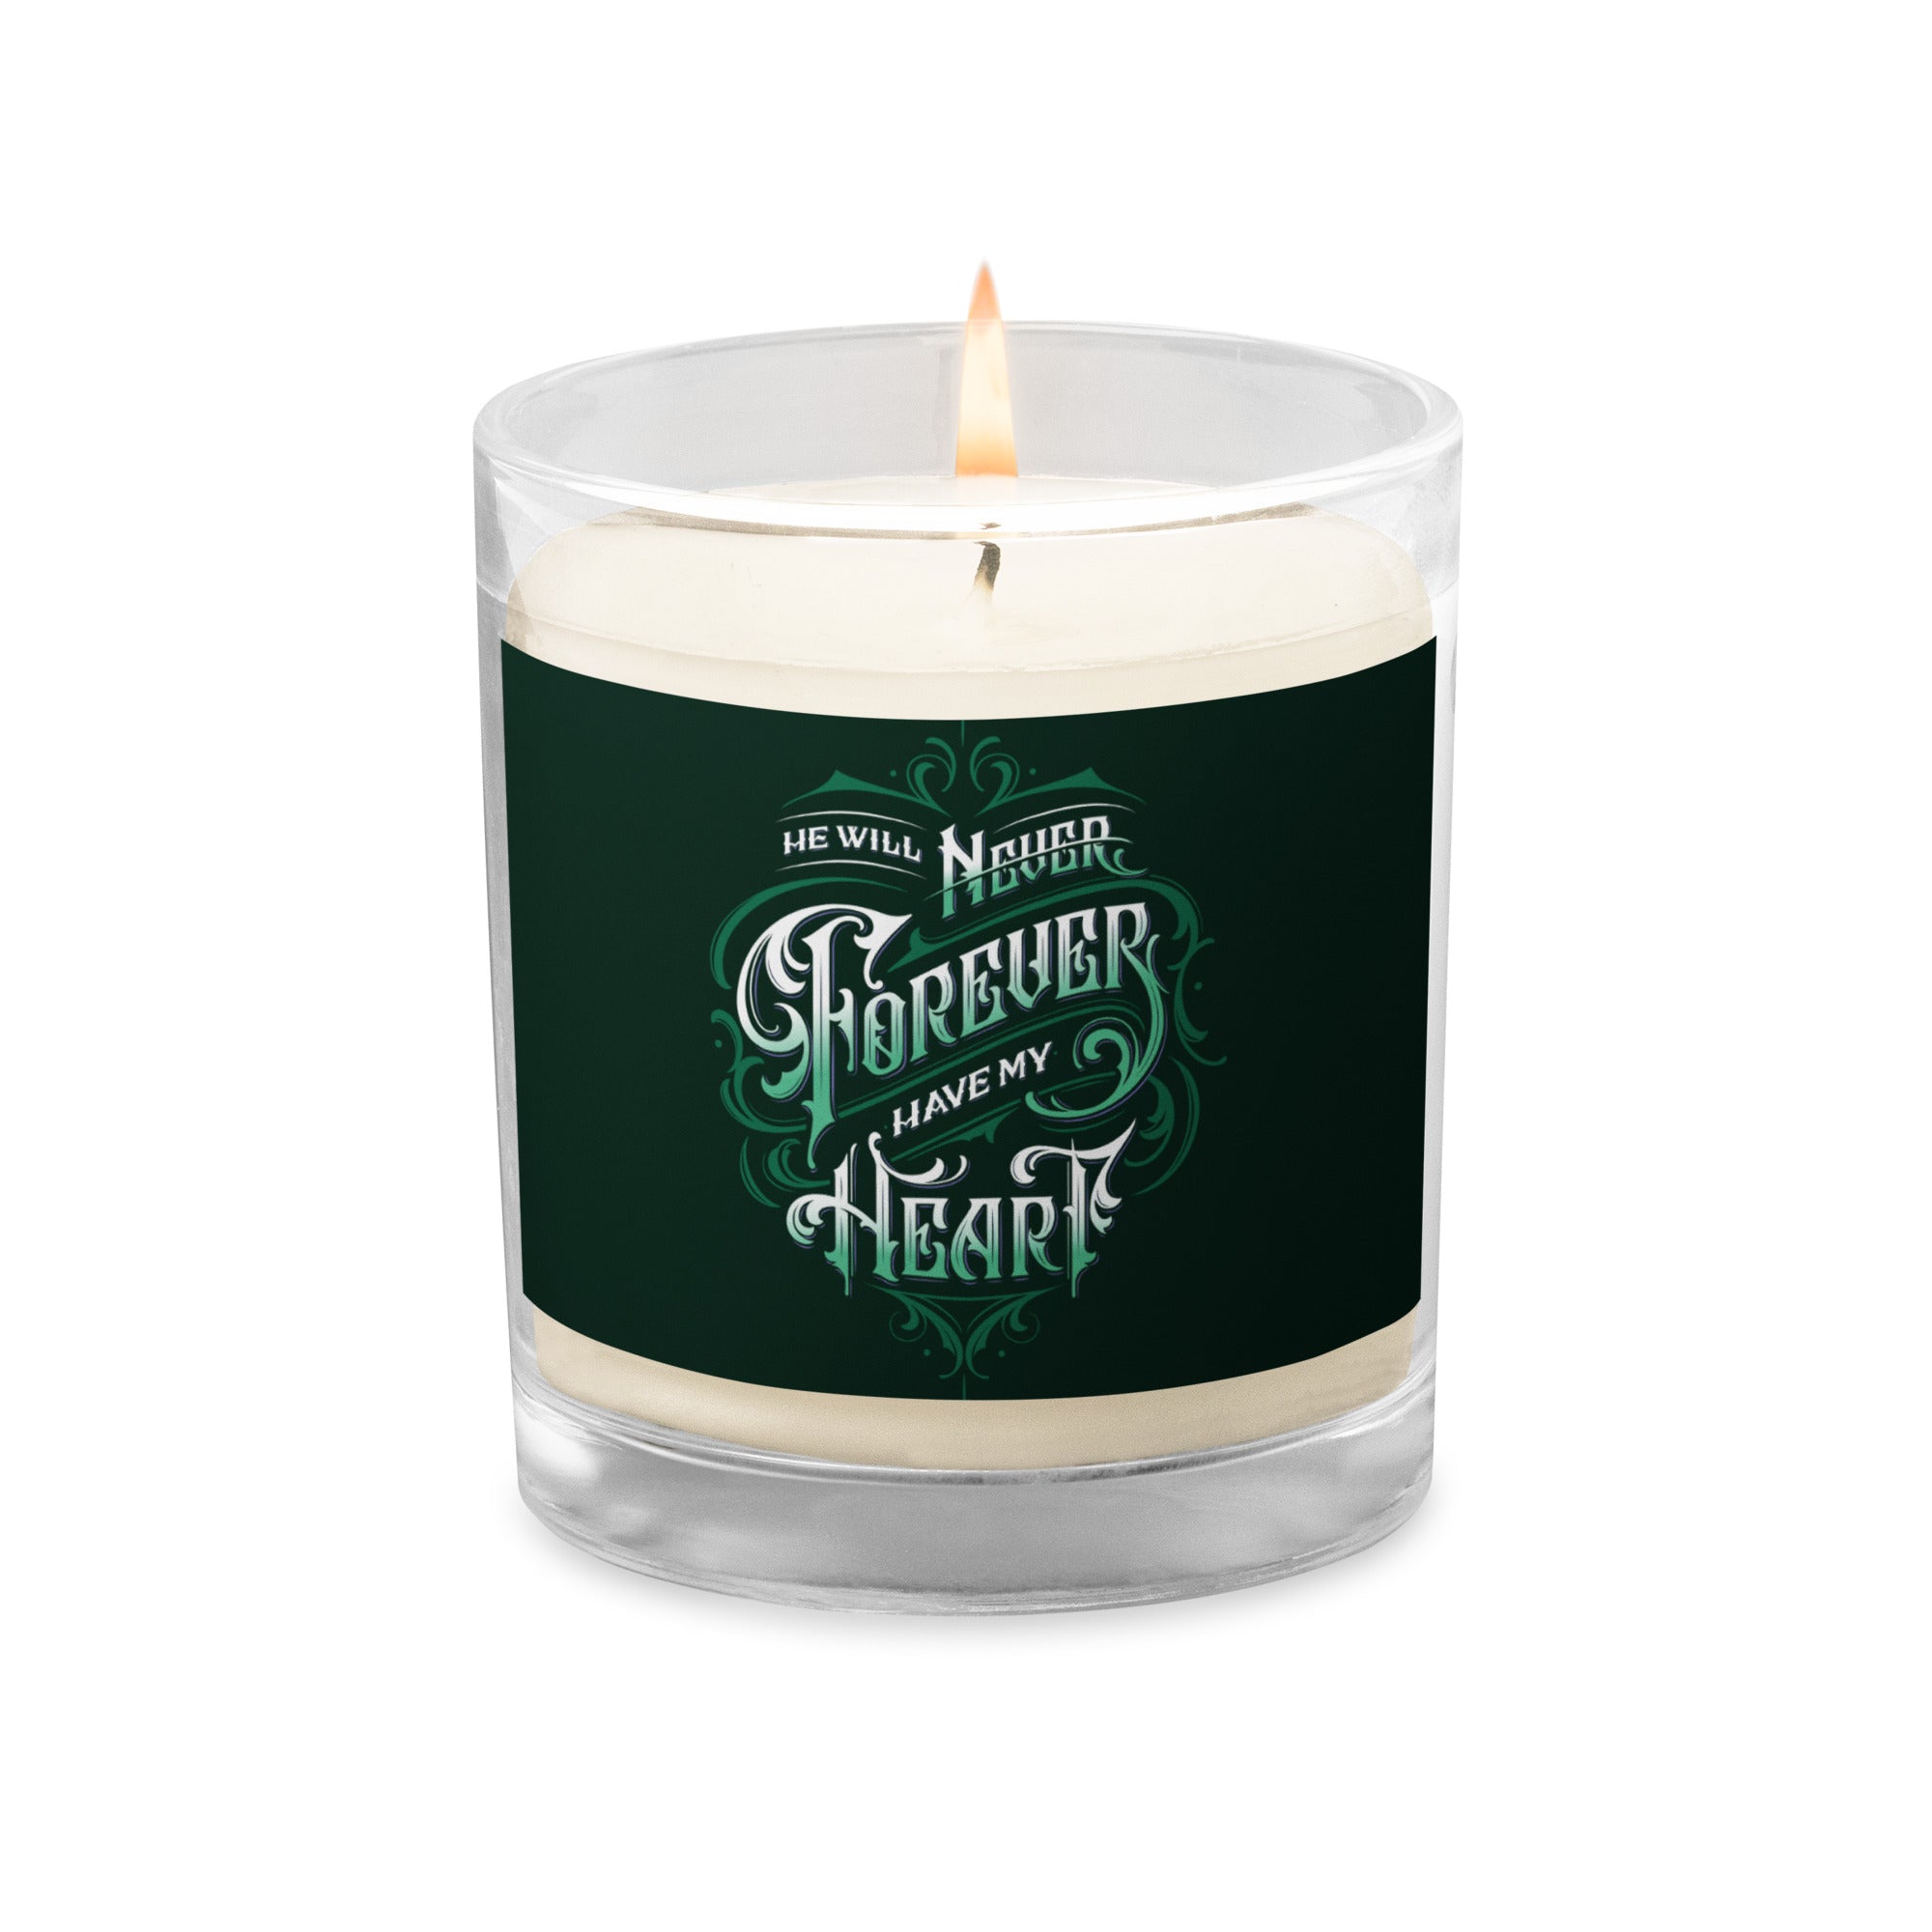 "He will never/forever have my heart" glass jar soy wax candle